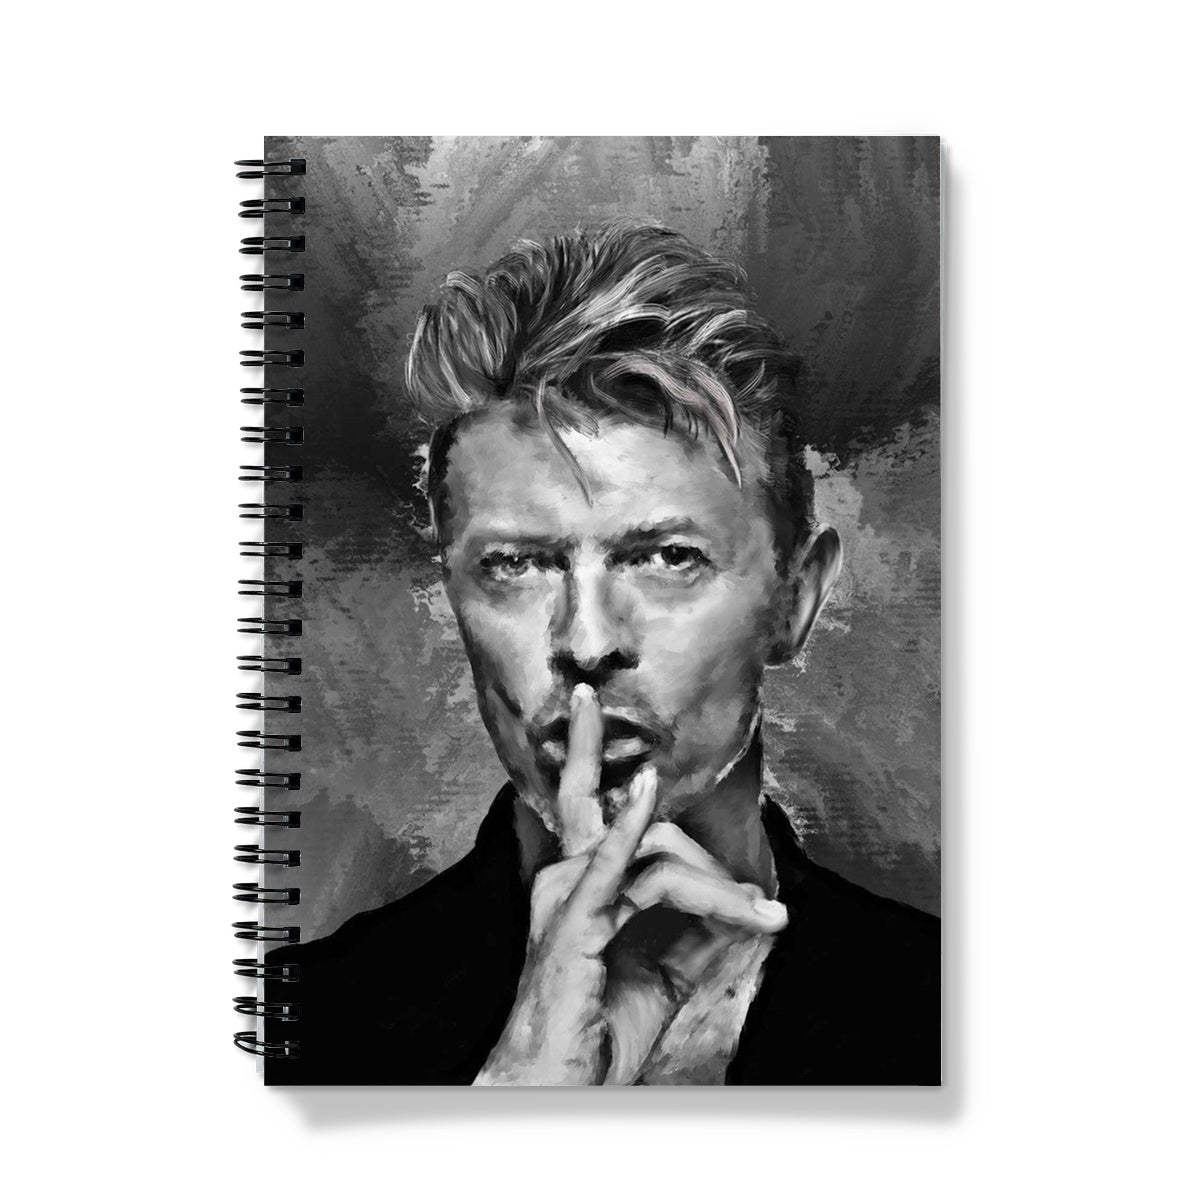 Bowie 'Shhh!' Painting Notebook